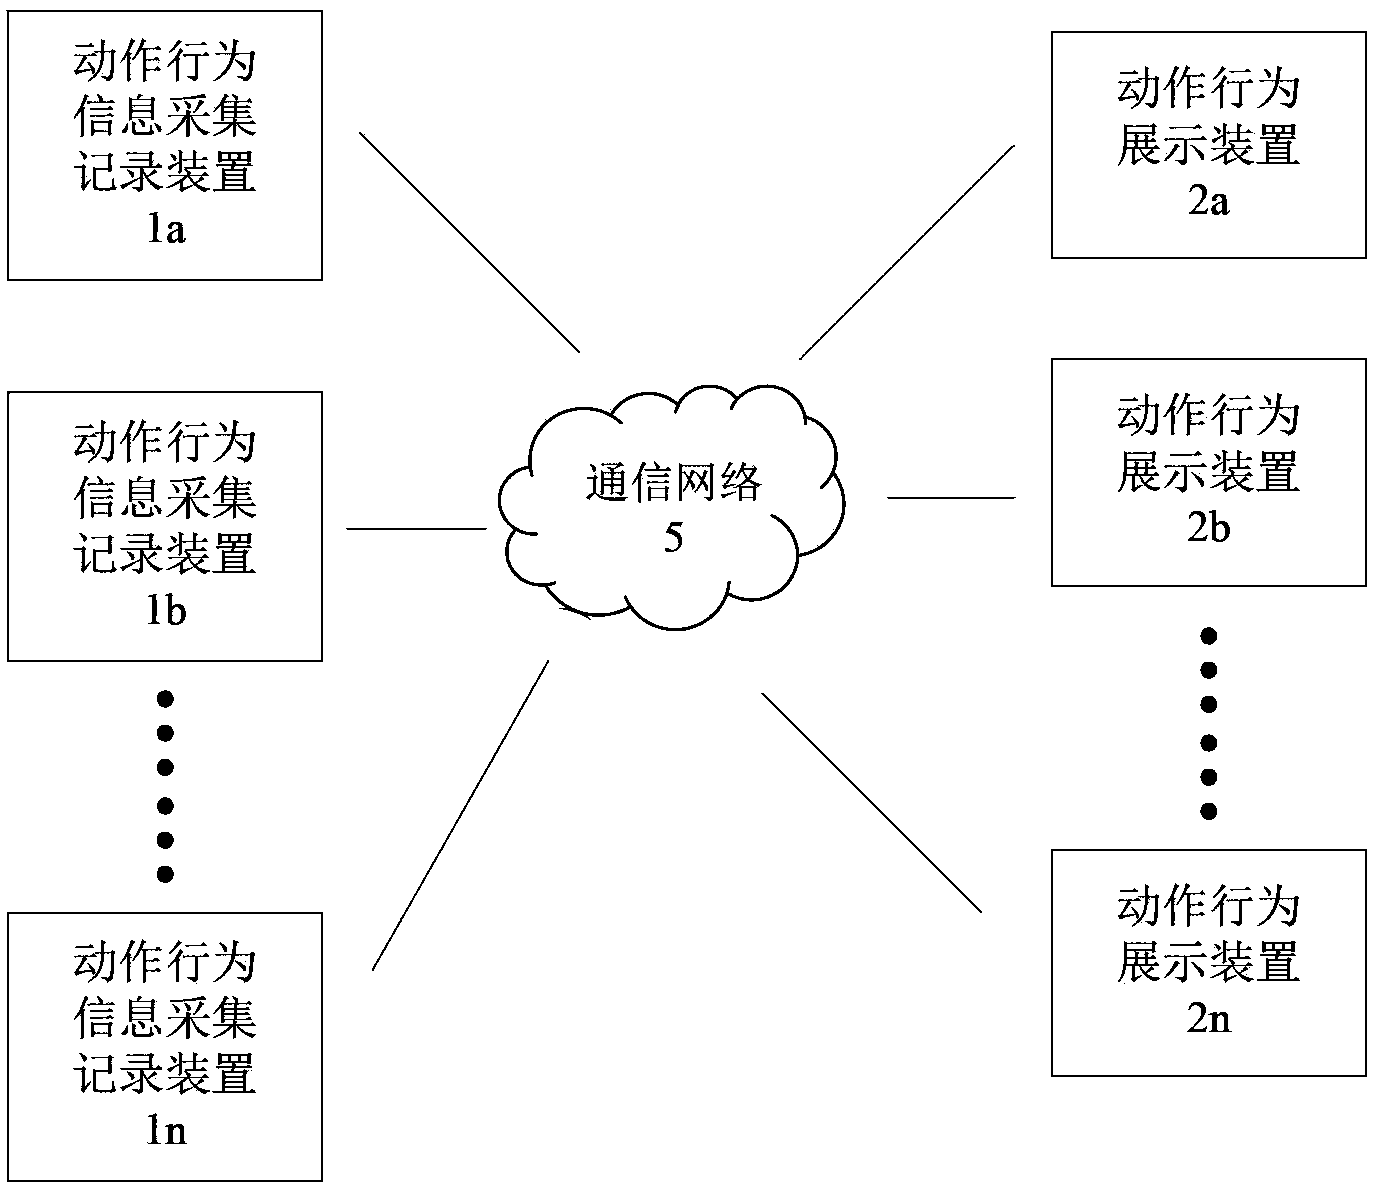 Motion behavior analysis recording and reproducing system and method